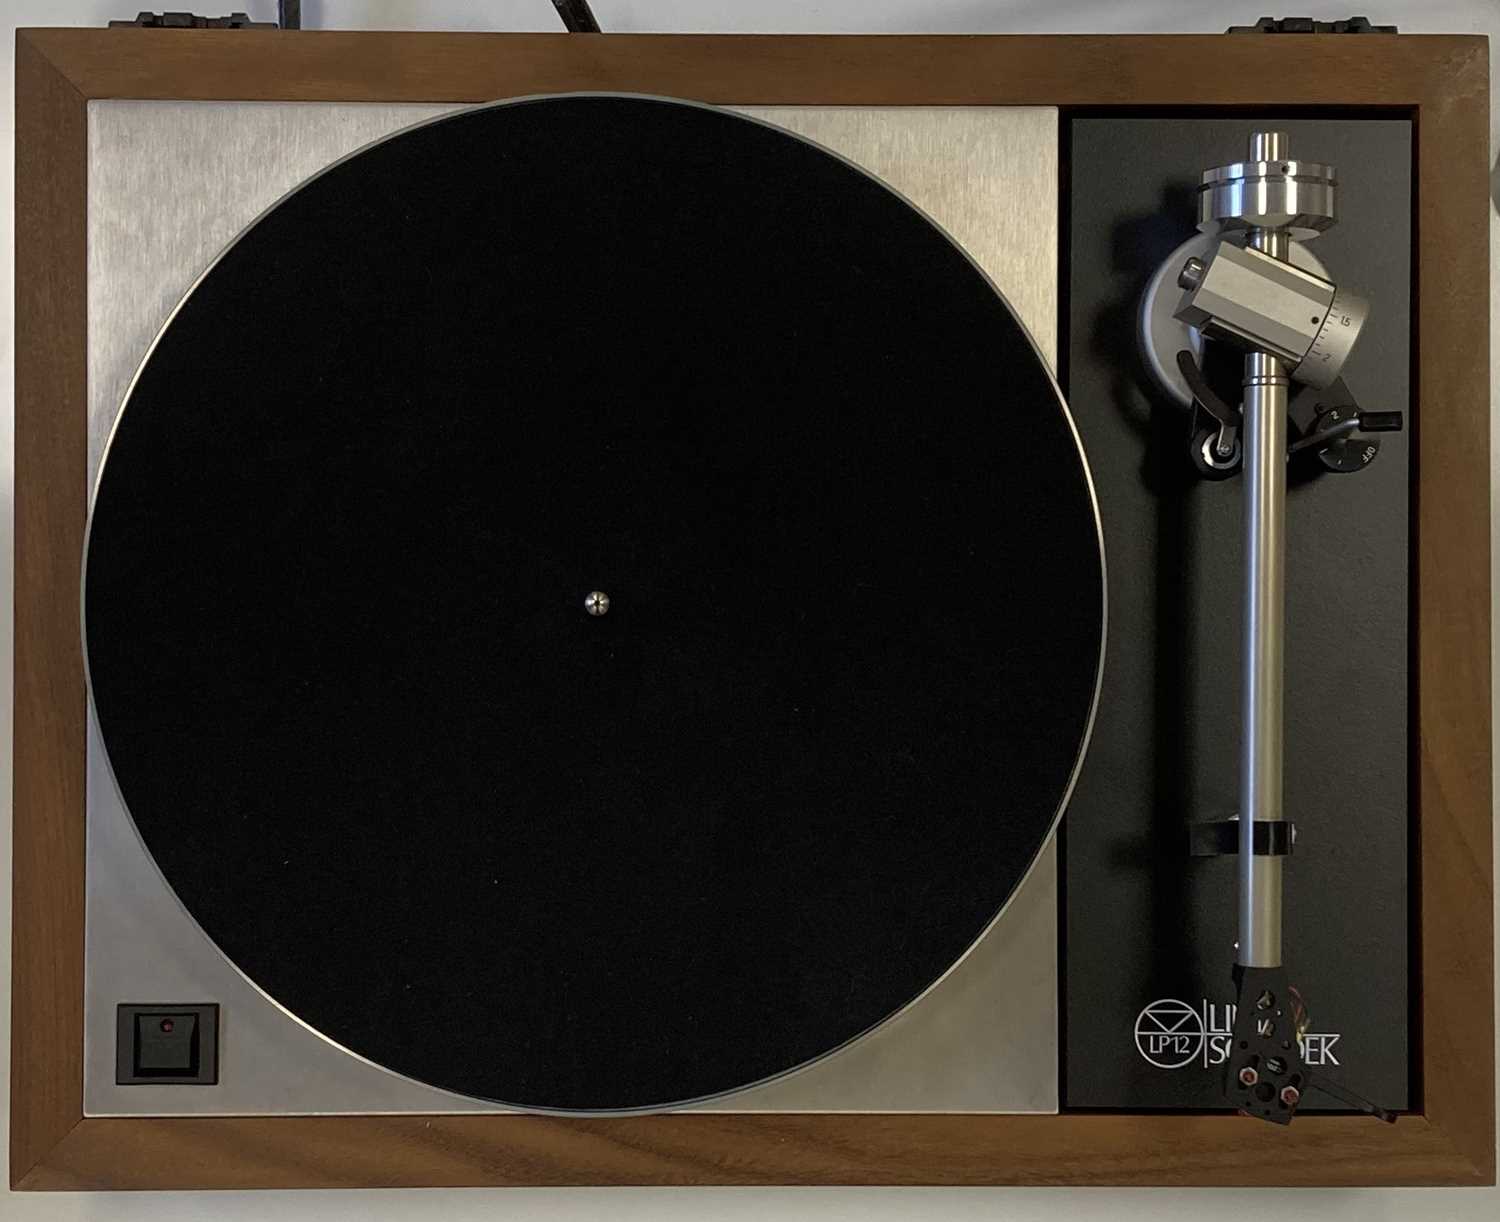 Lot 44 - LINN LP12 TURNTABLE WITH ITTOK TONEARM AND PHONO BOX.